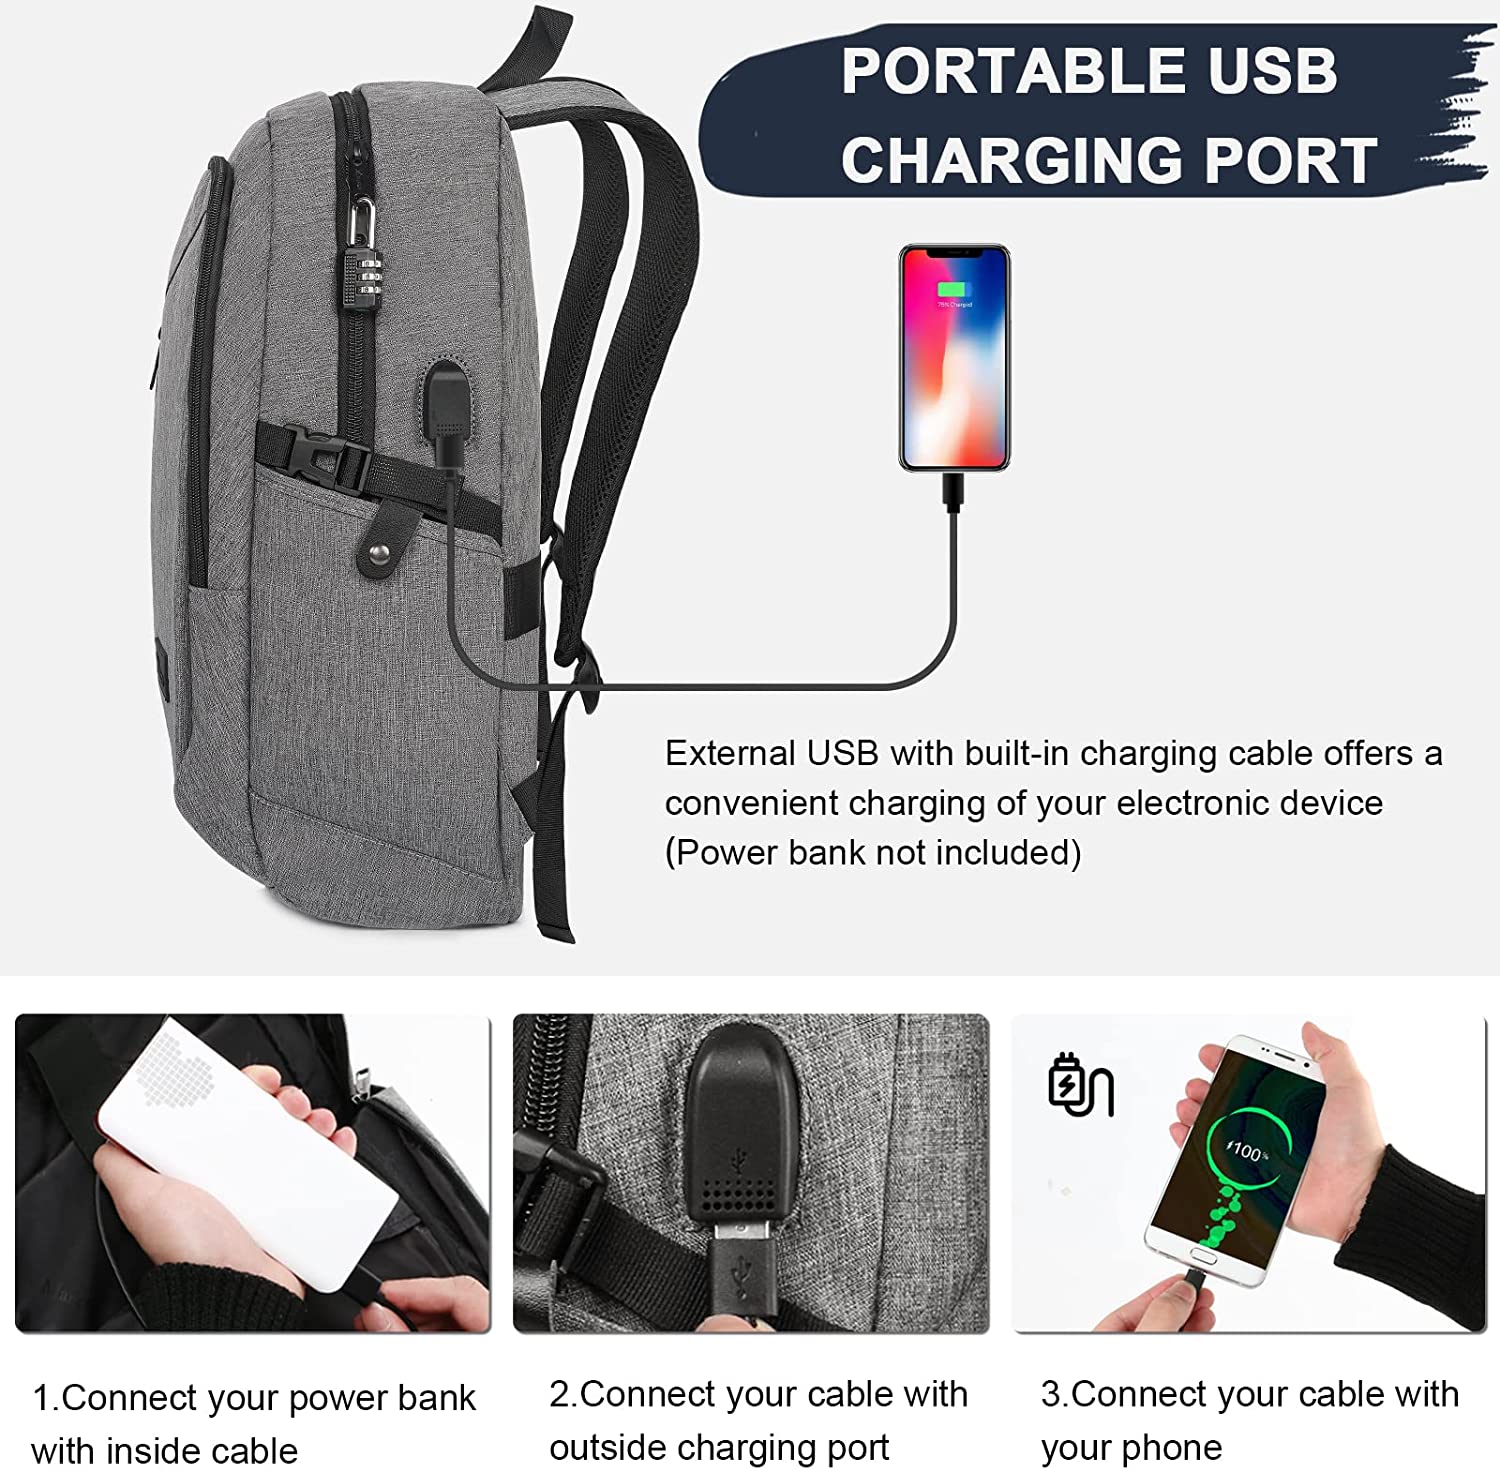 mancro business water resistant polyester laptop backpack with usb charging port and lock fits under 17-inch laptop and notebook, grey - image 2 of 9